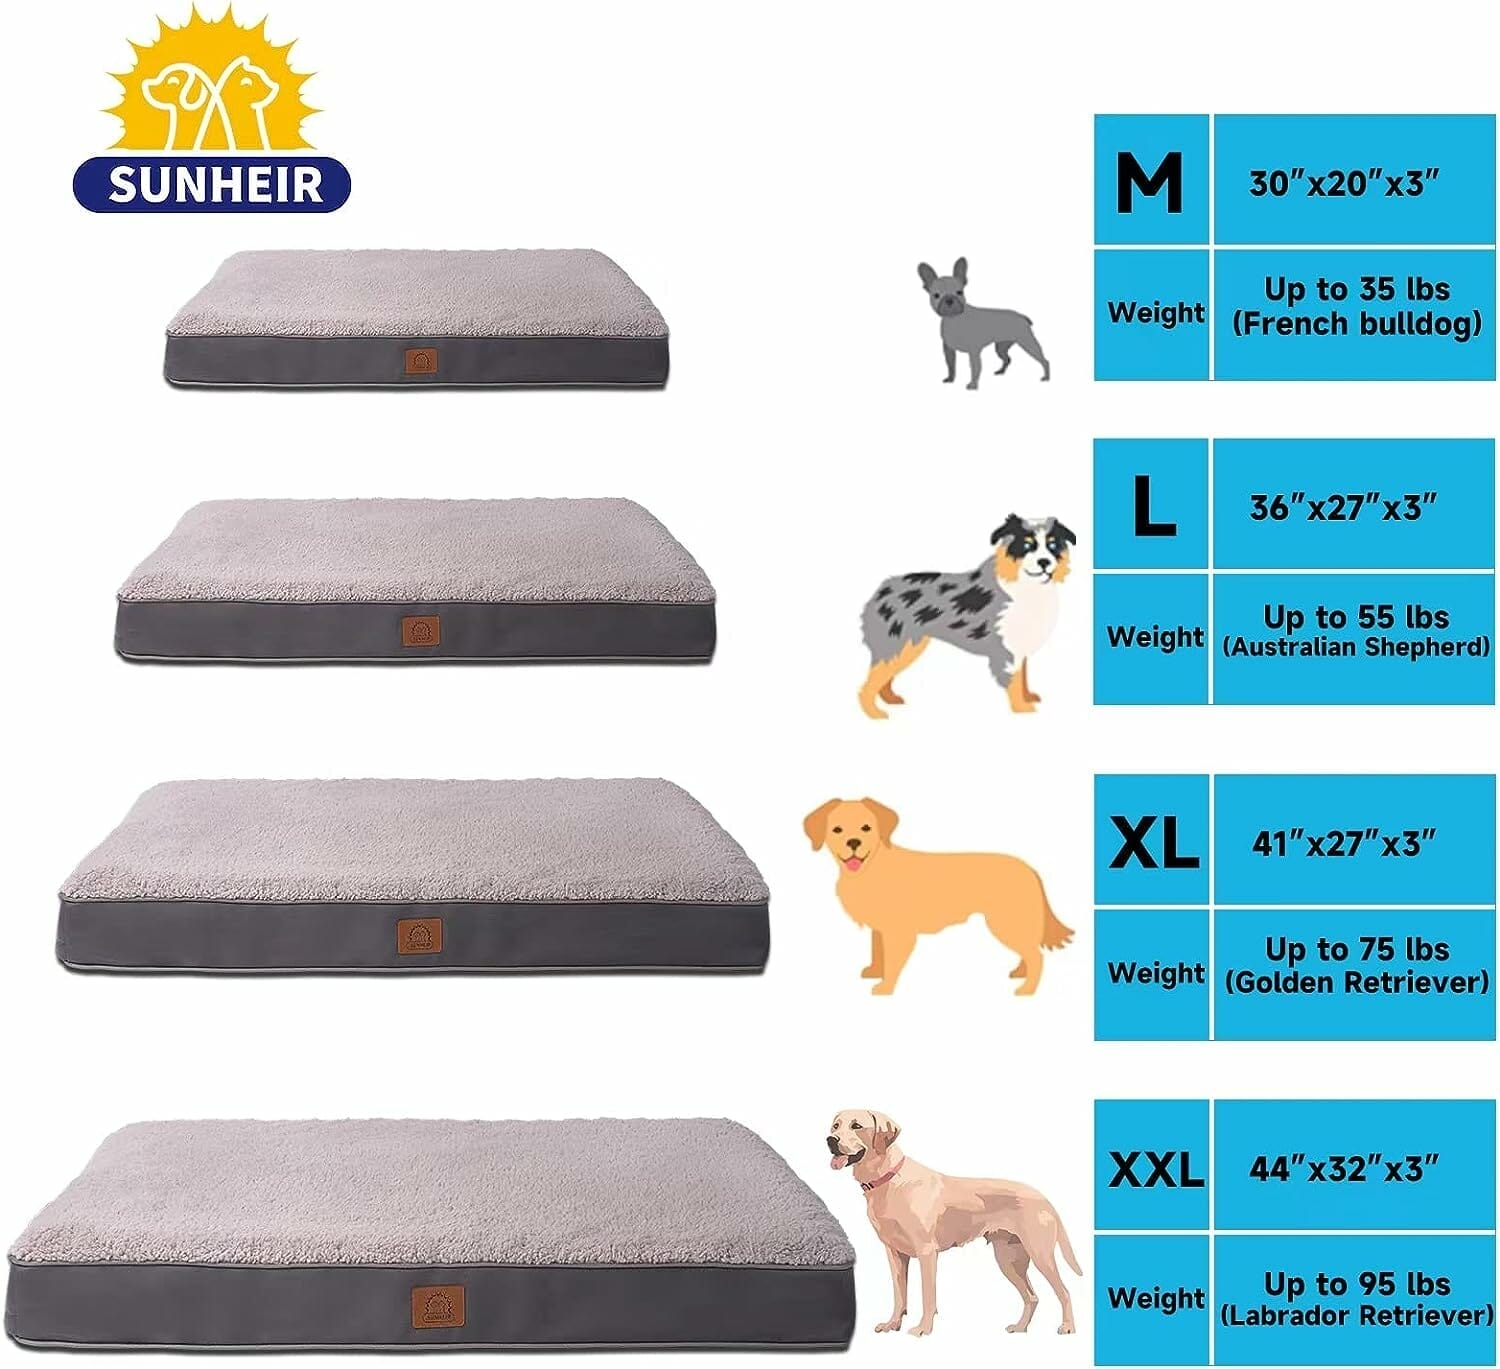 Sunheir Orthopedic Dog Bed Review: Is it Worth it?